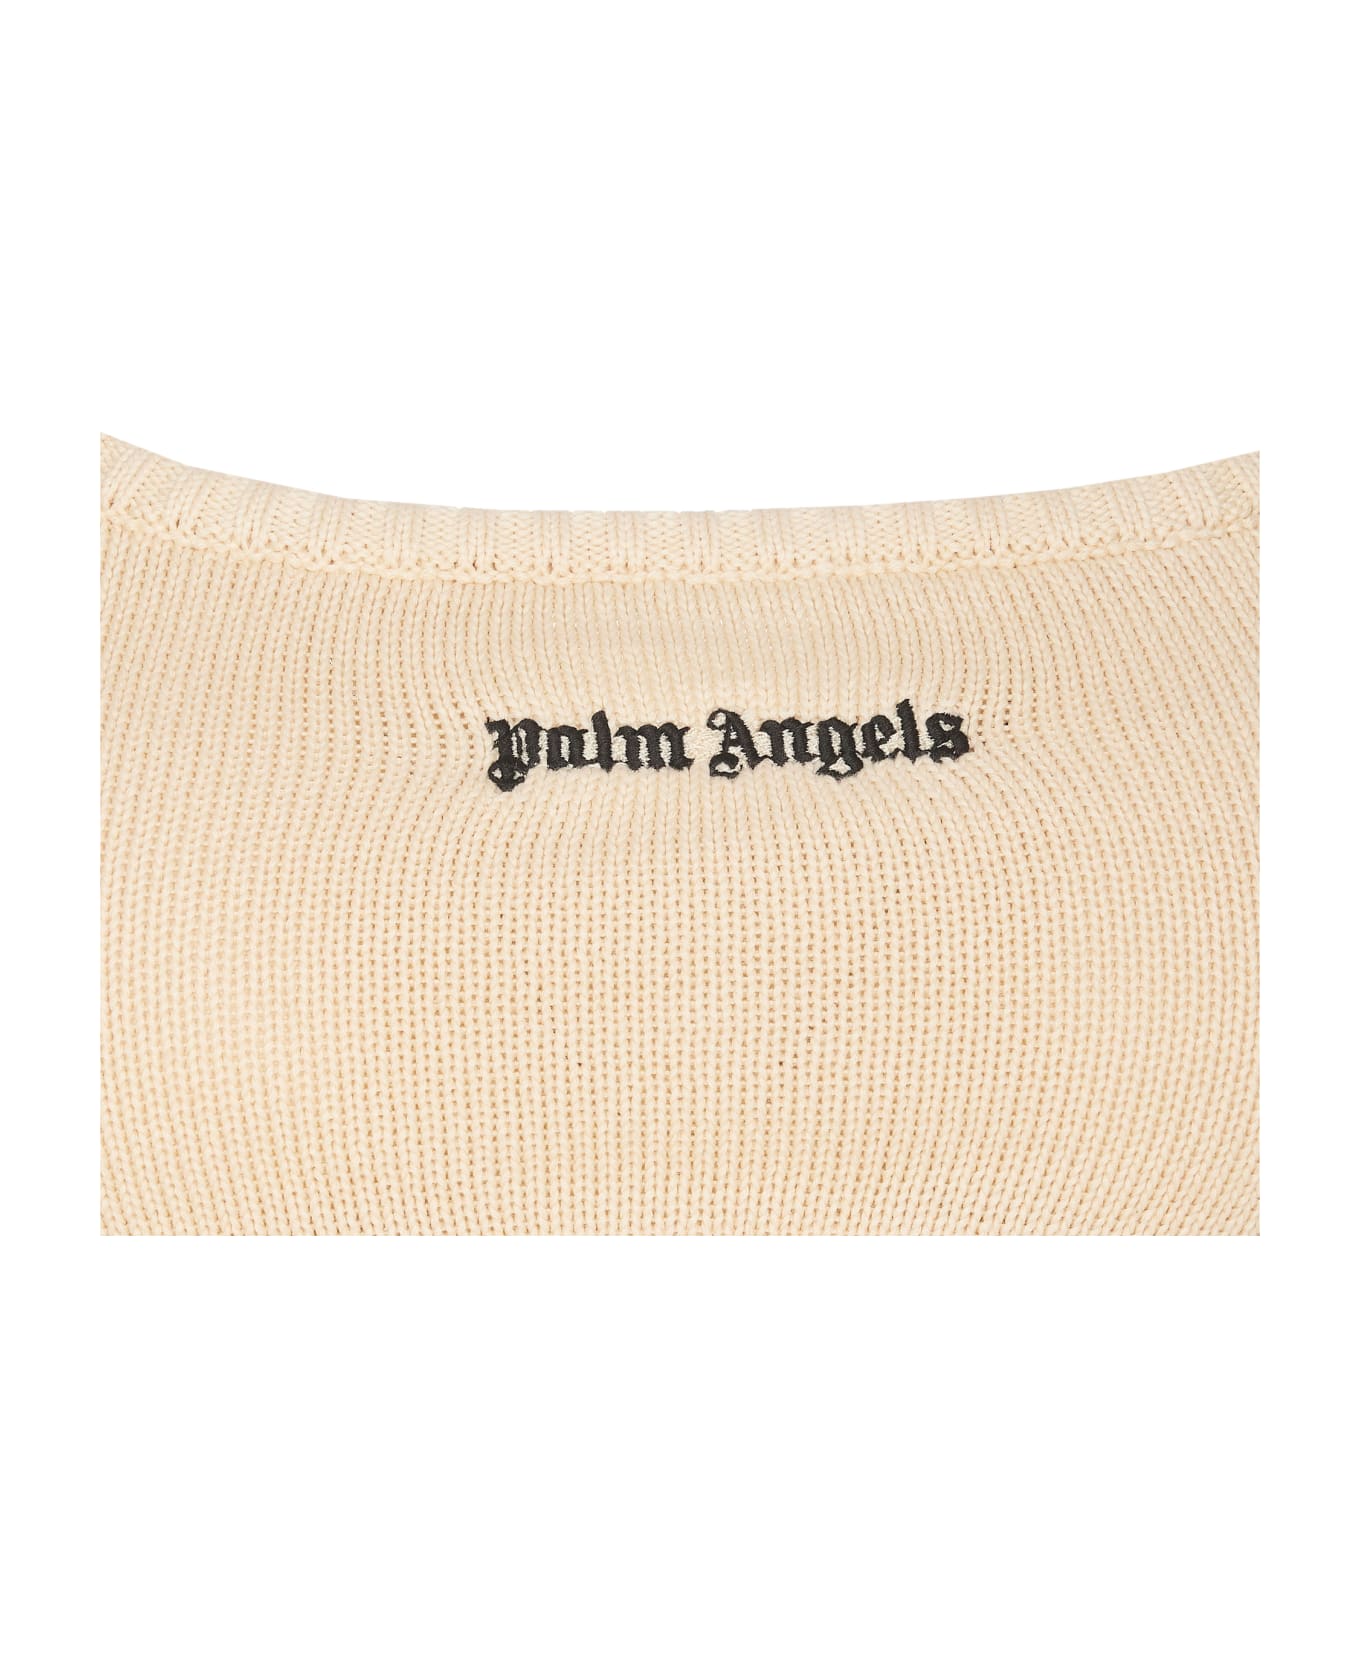 Palm Angels Classic Logo Knit Top - Off White トップス